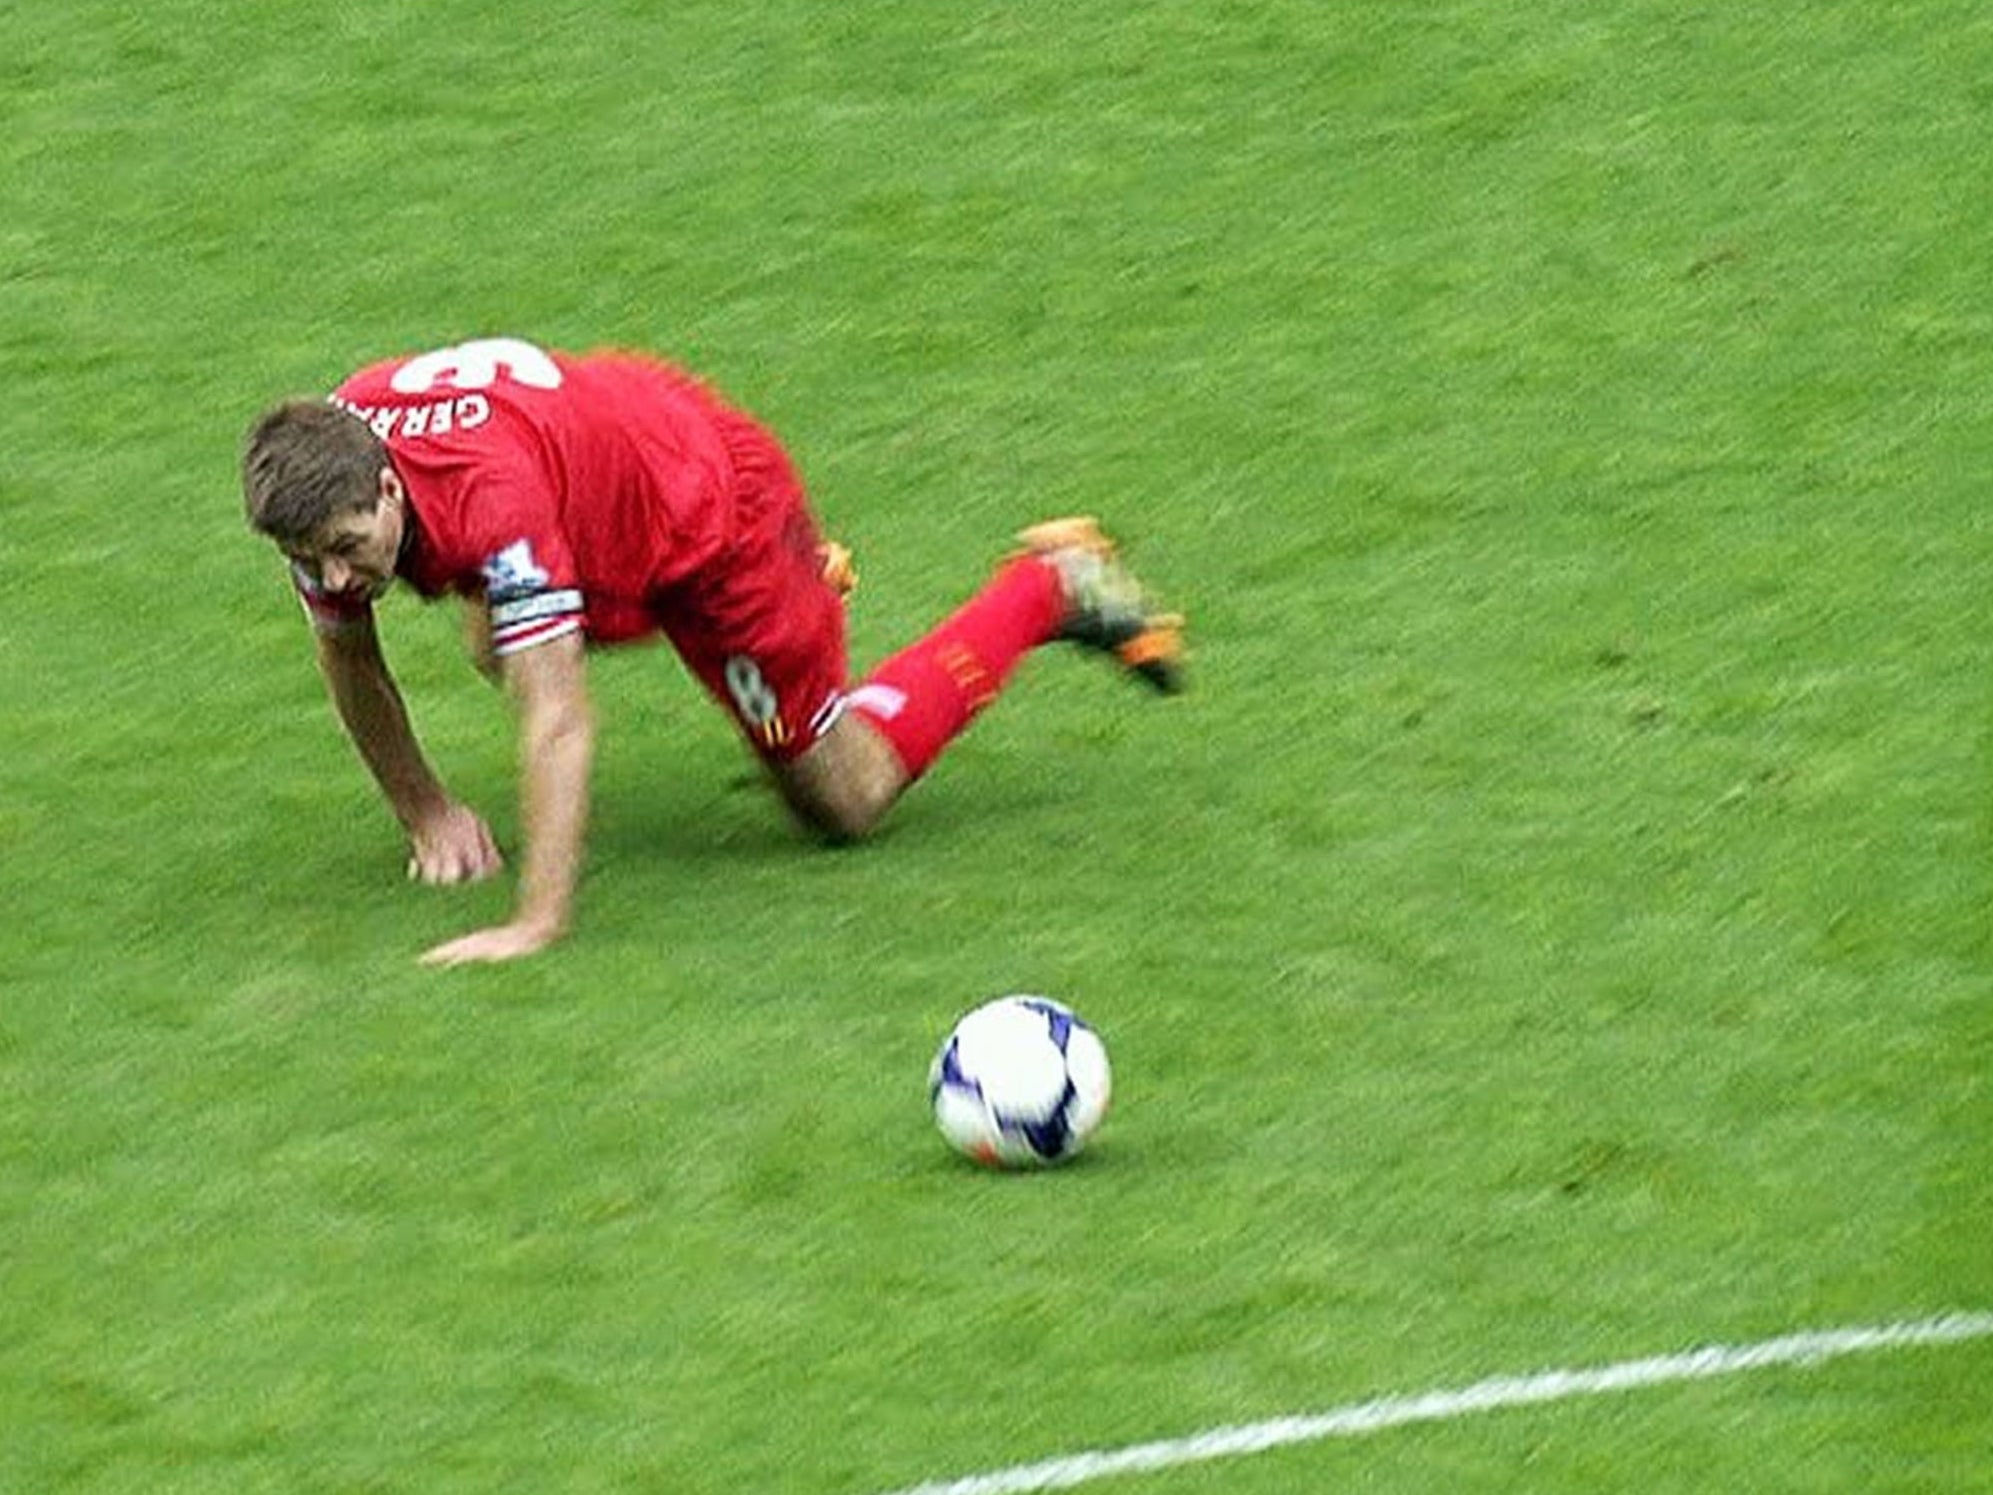 Liverpool's captain was inconsolable afterwards